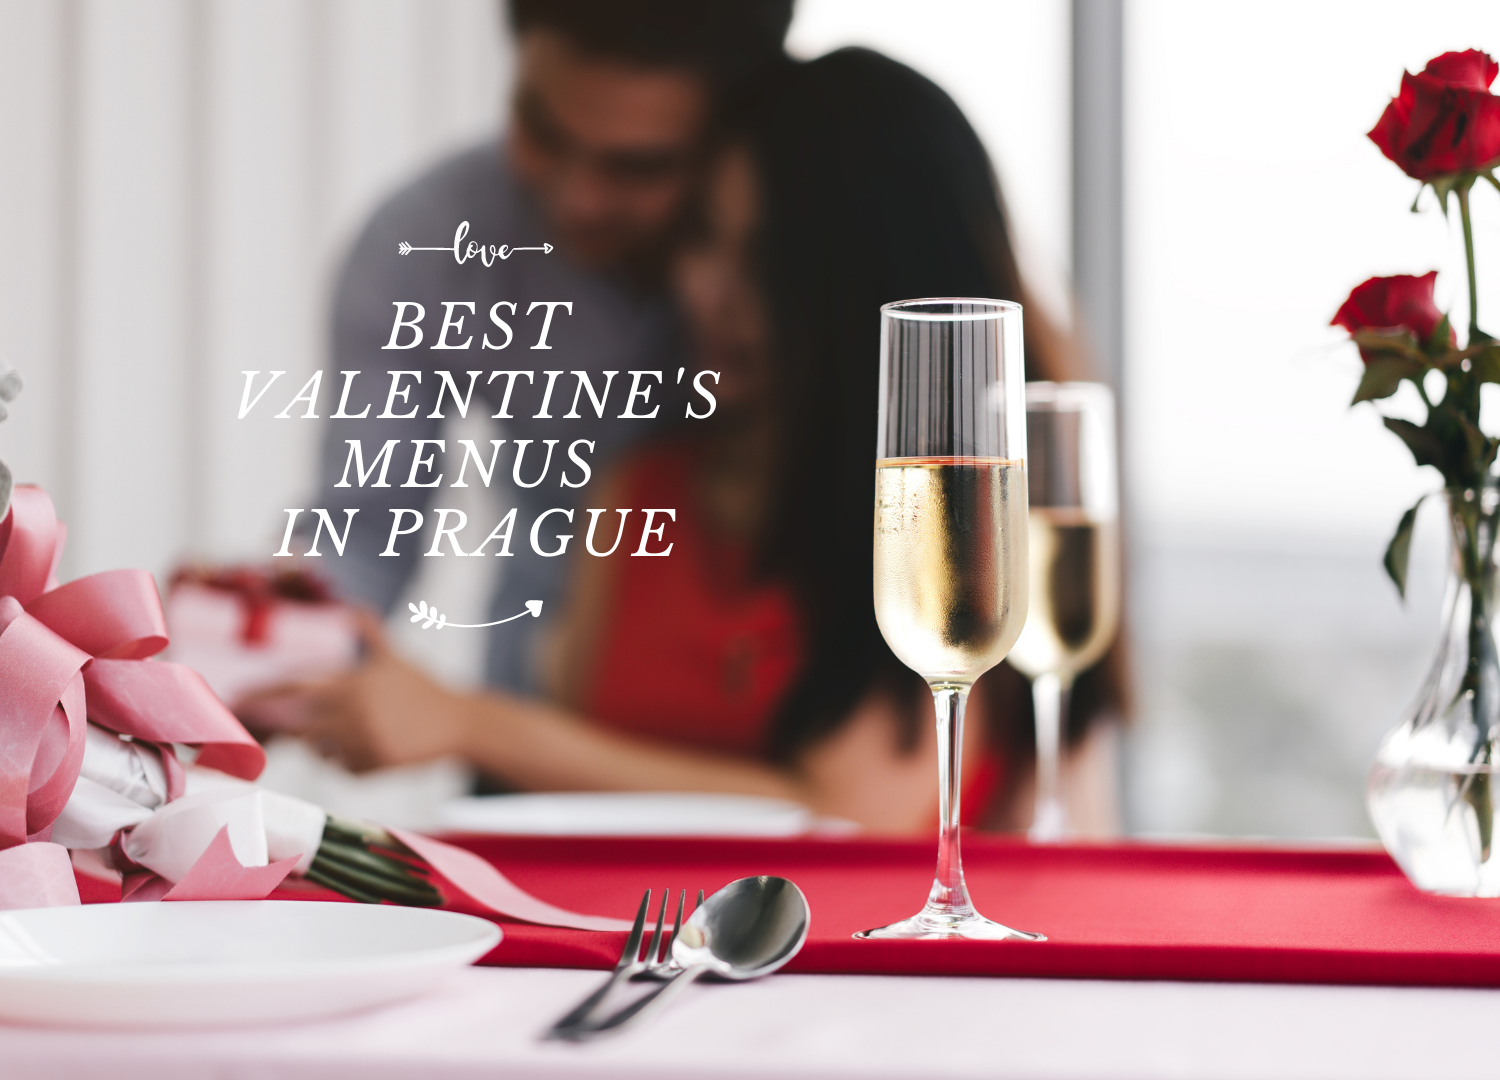 Valentine%27s+menus+in+Prague_the+5+most+romantic+places+for+a+valentines+day+dinner+in+prague